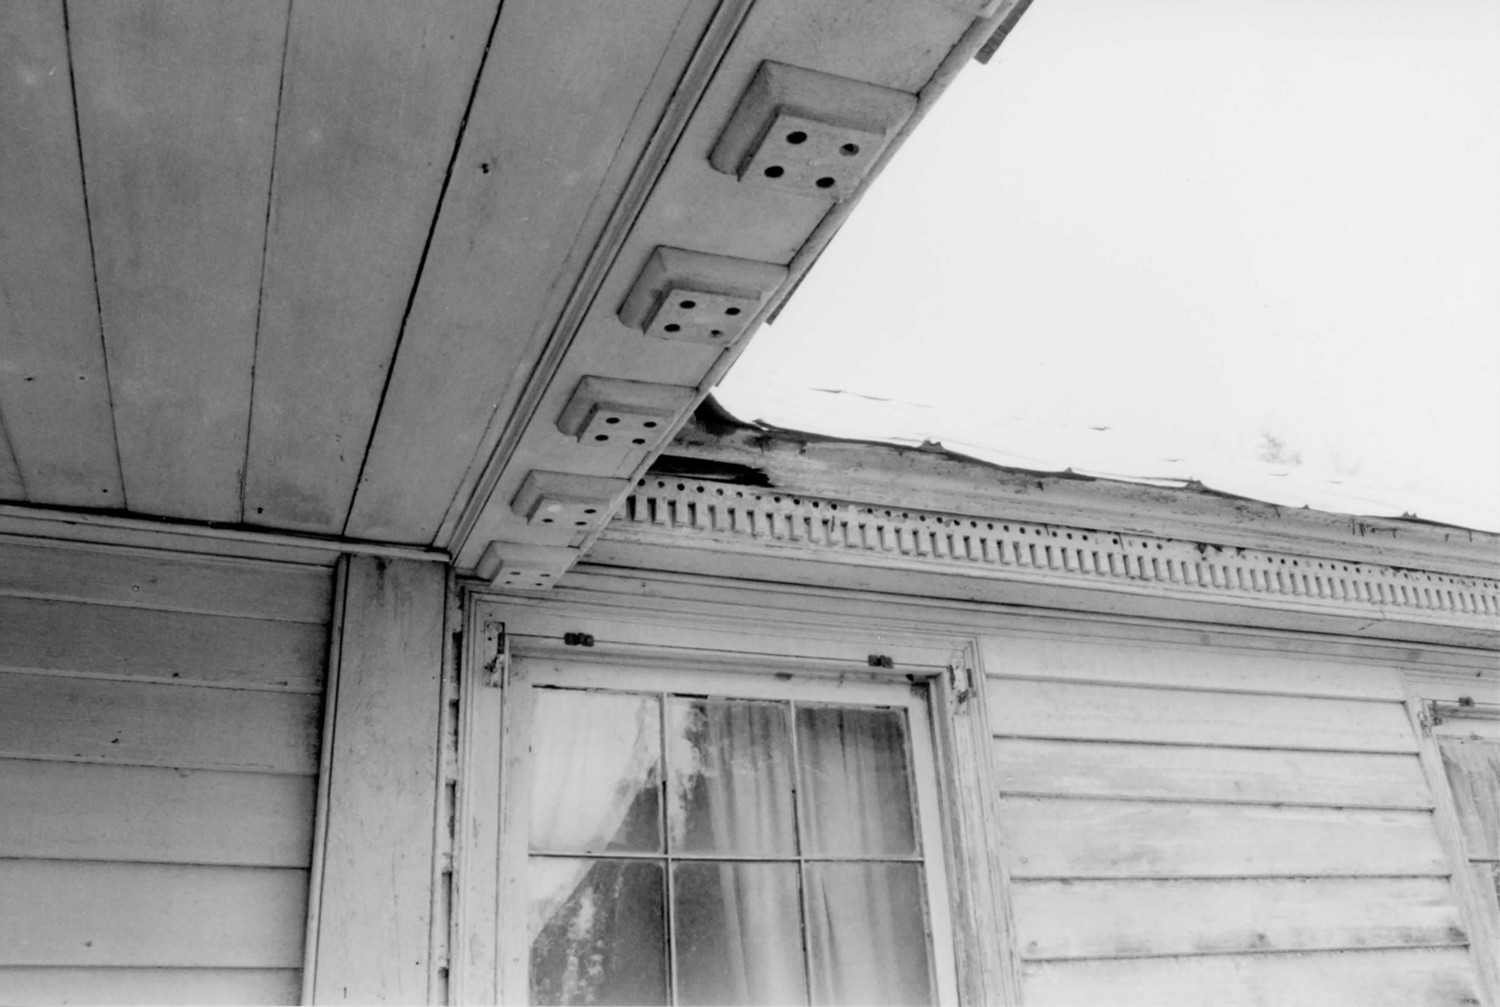 Dry Forks Plantation - James Asbury Tait House, Coy Alabama Cornice details on front elevation facing northeast (1998)